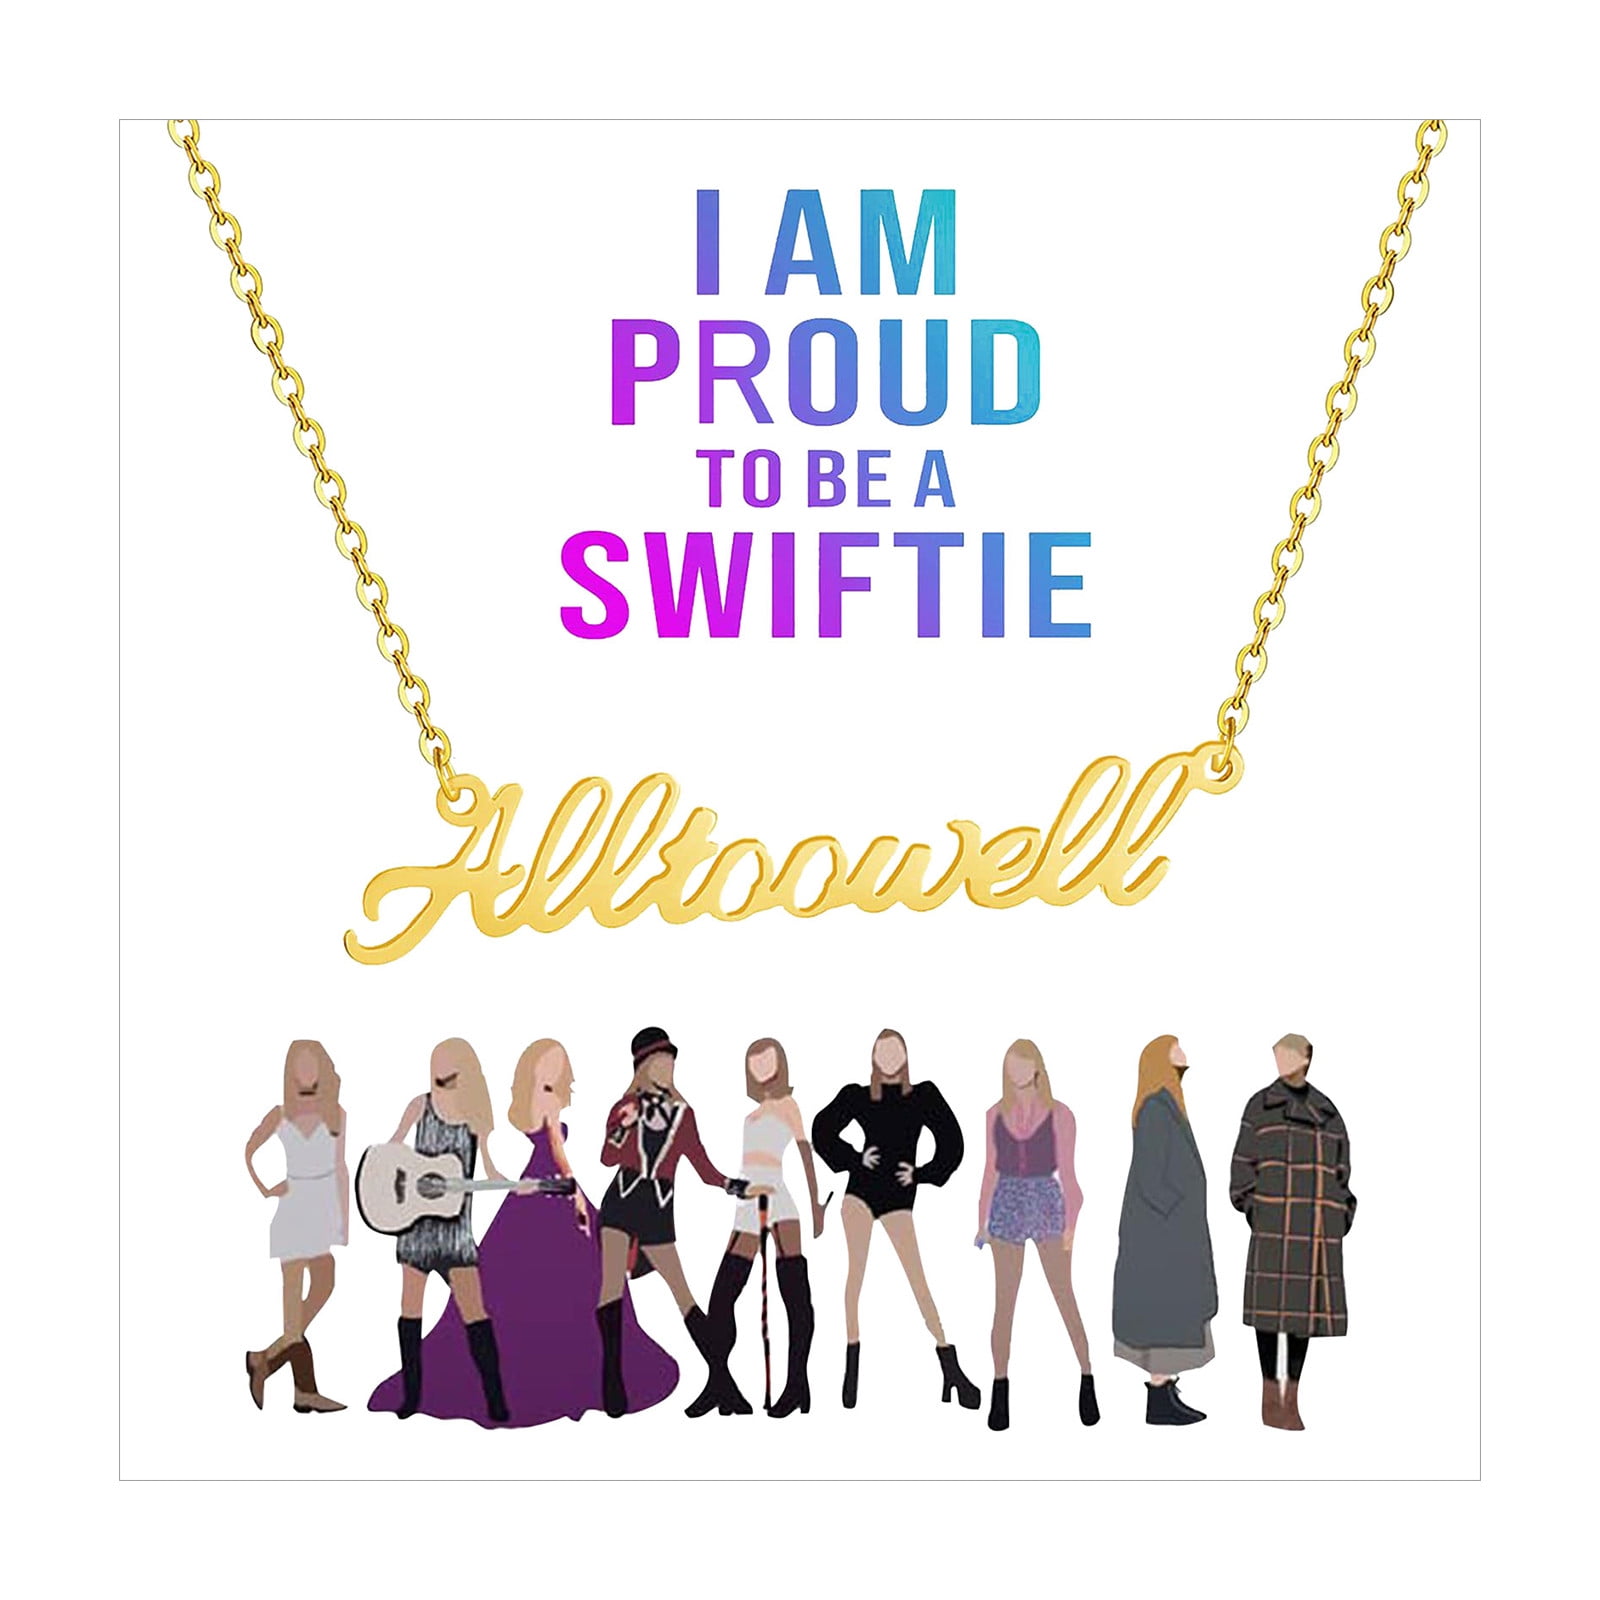 Taylor Swift Merch Necklace TS Album Song Title Women Inspired Music Lover Singer Fans Gifts Gold e7d66e26 82a1 4fd0 946e 012fcce02cc4.26ff8da81cb3d87944d503ca568d1c7e